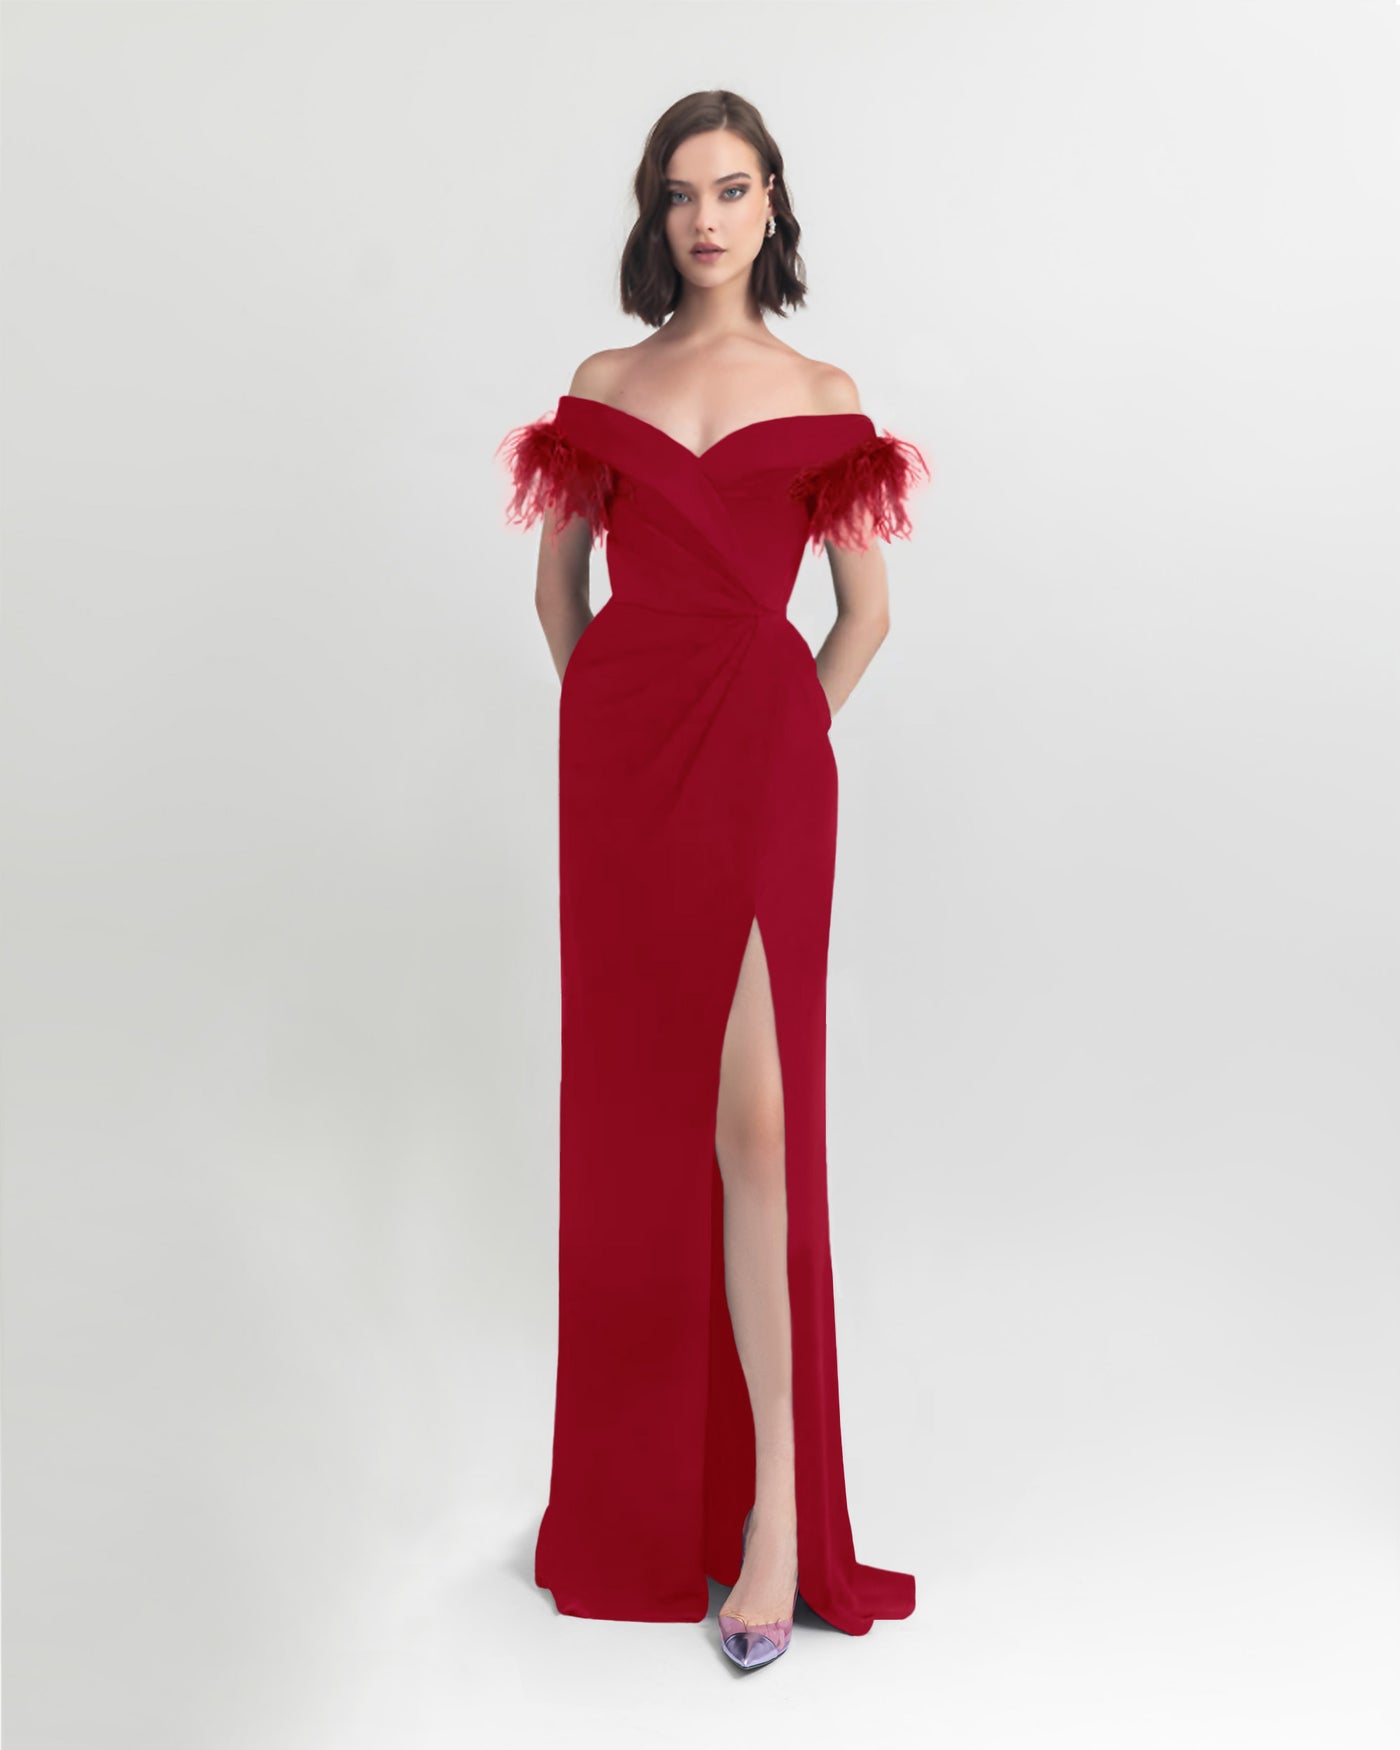 Slim Cut Red Dress With Feathers